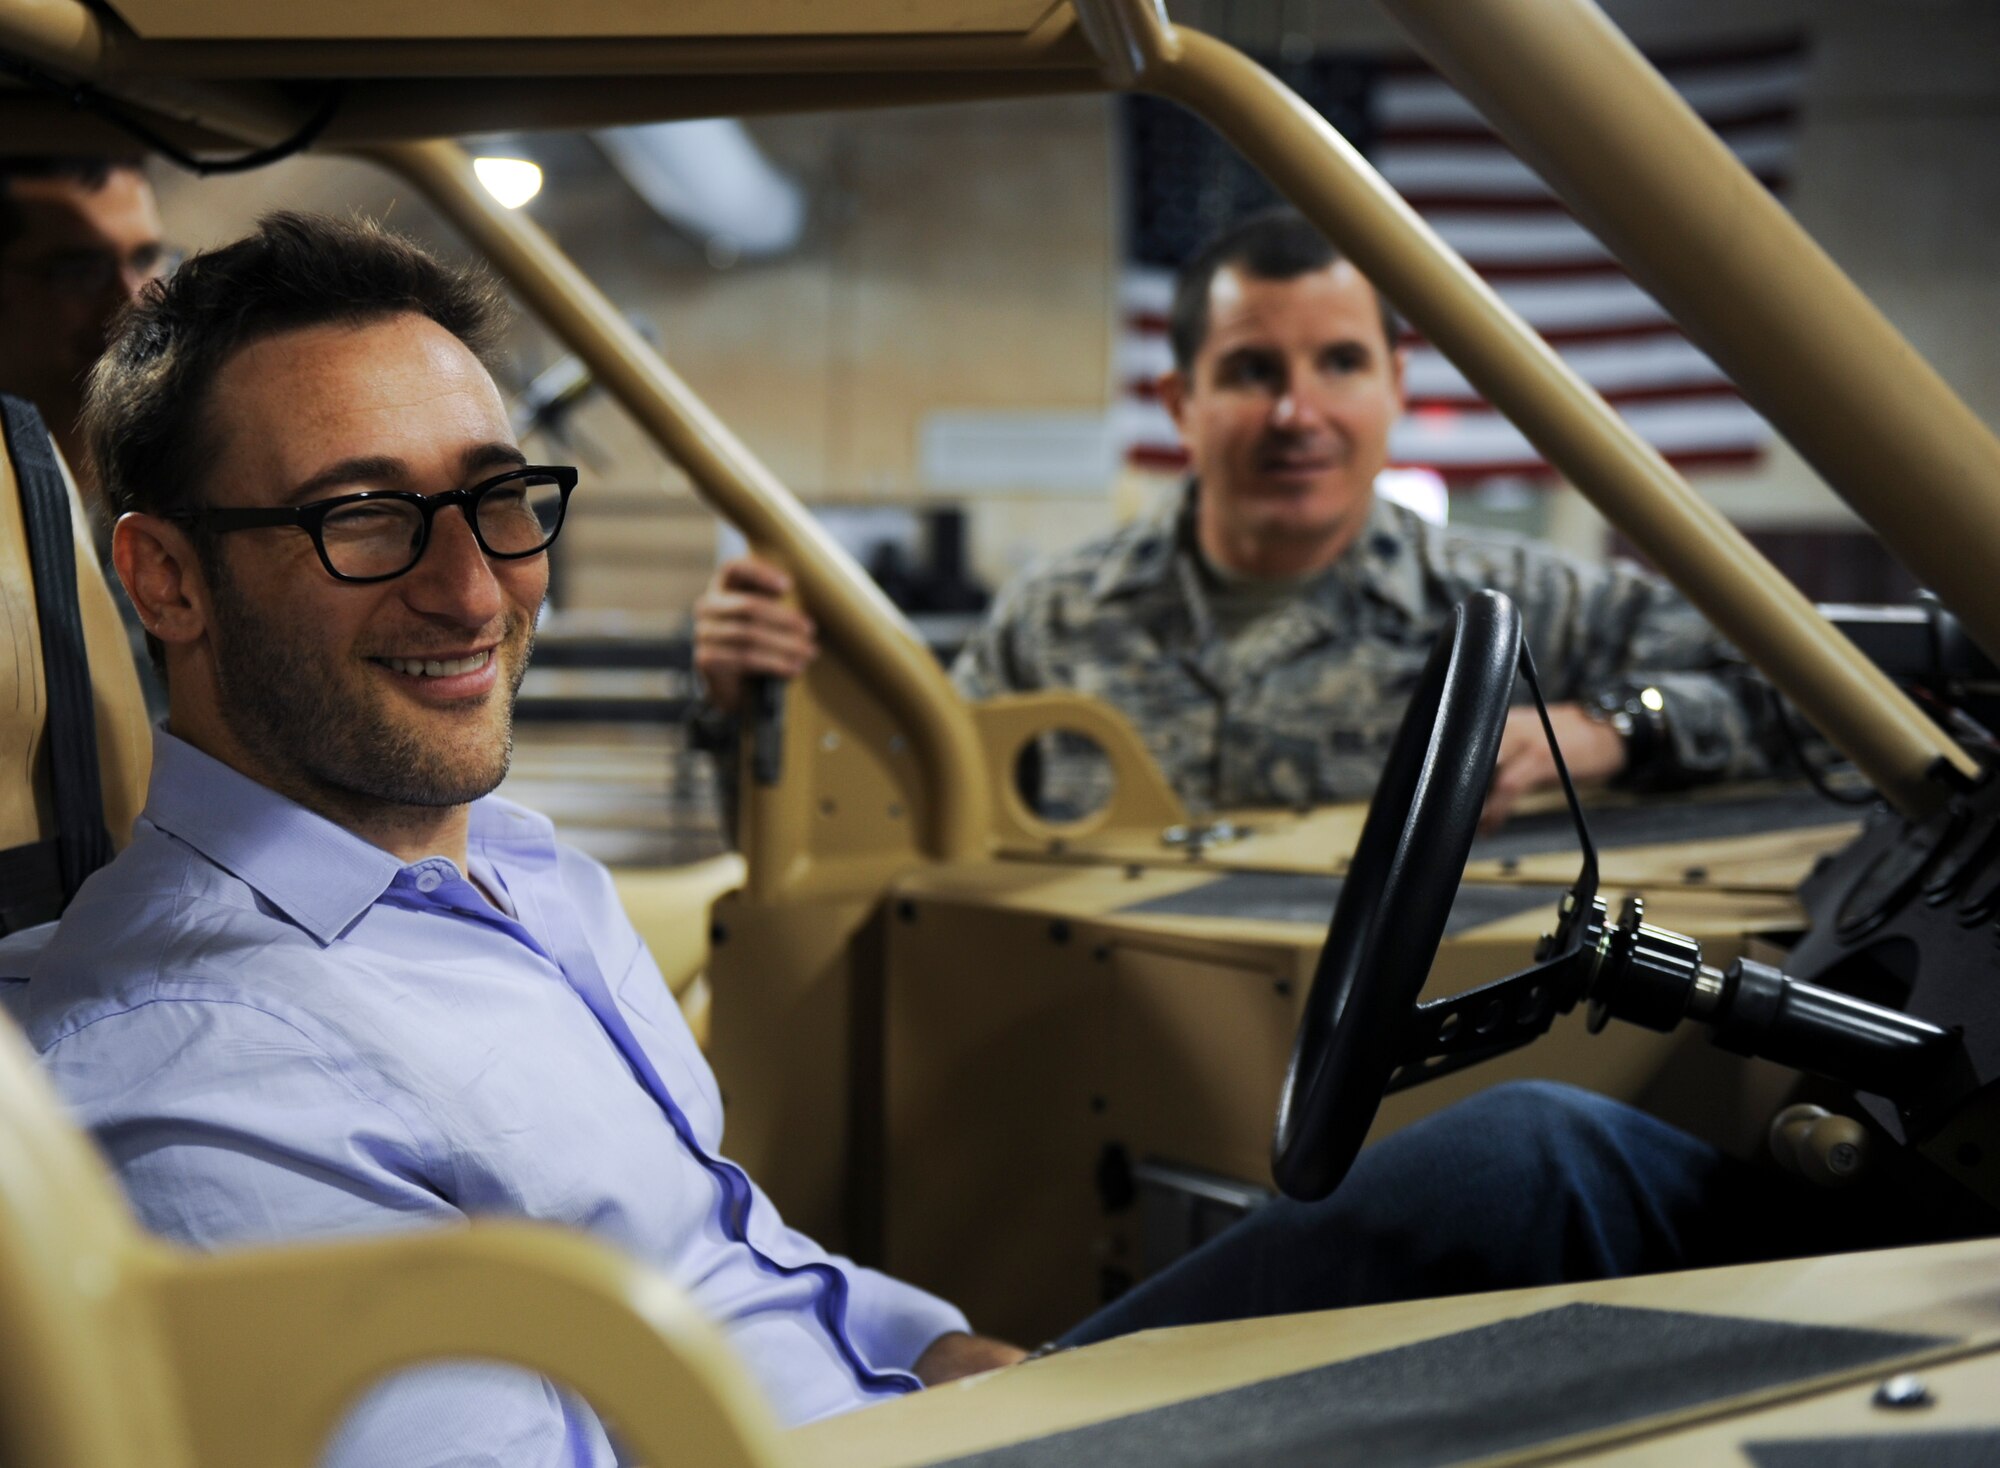 Simon Sinek, an internationally renowned speaker and author, sits inside of a Guardian Angel Air-Deployable Rescue Vehicle while visiting the 58th Rescue Squadron during a visit to Nellis Air Force Base, Nev., Oct. 1, 2014. Sinek was visiting Nellis Air Force Base to get a better understanding of the mission and capabilities of the U.S. Air Force’s ground forces. (U.S. Air Force photo by Airman 1st Class Mikaley Towle)